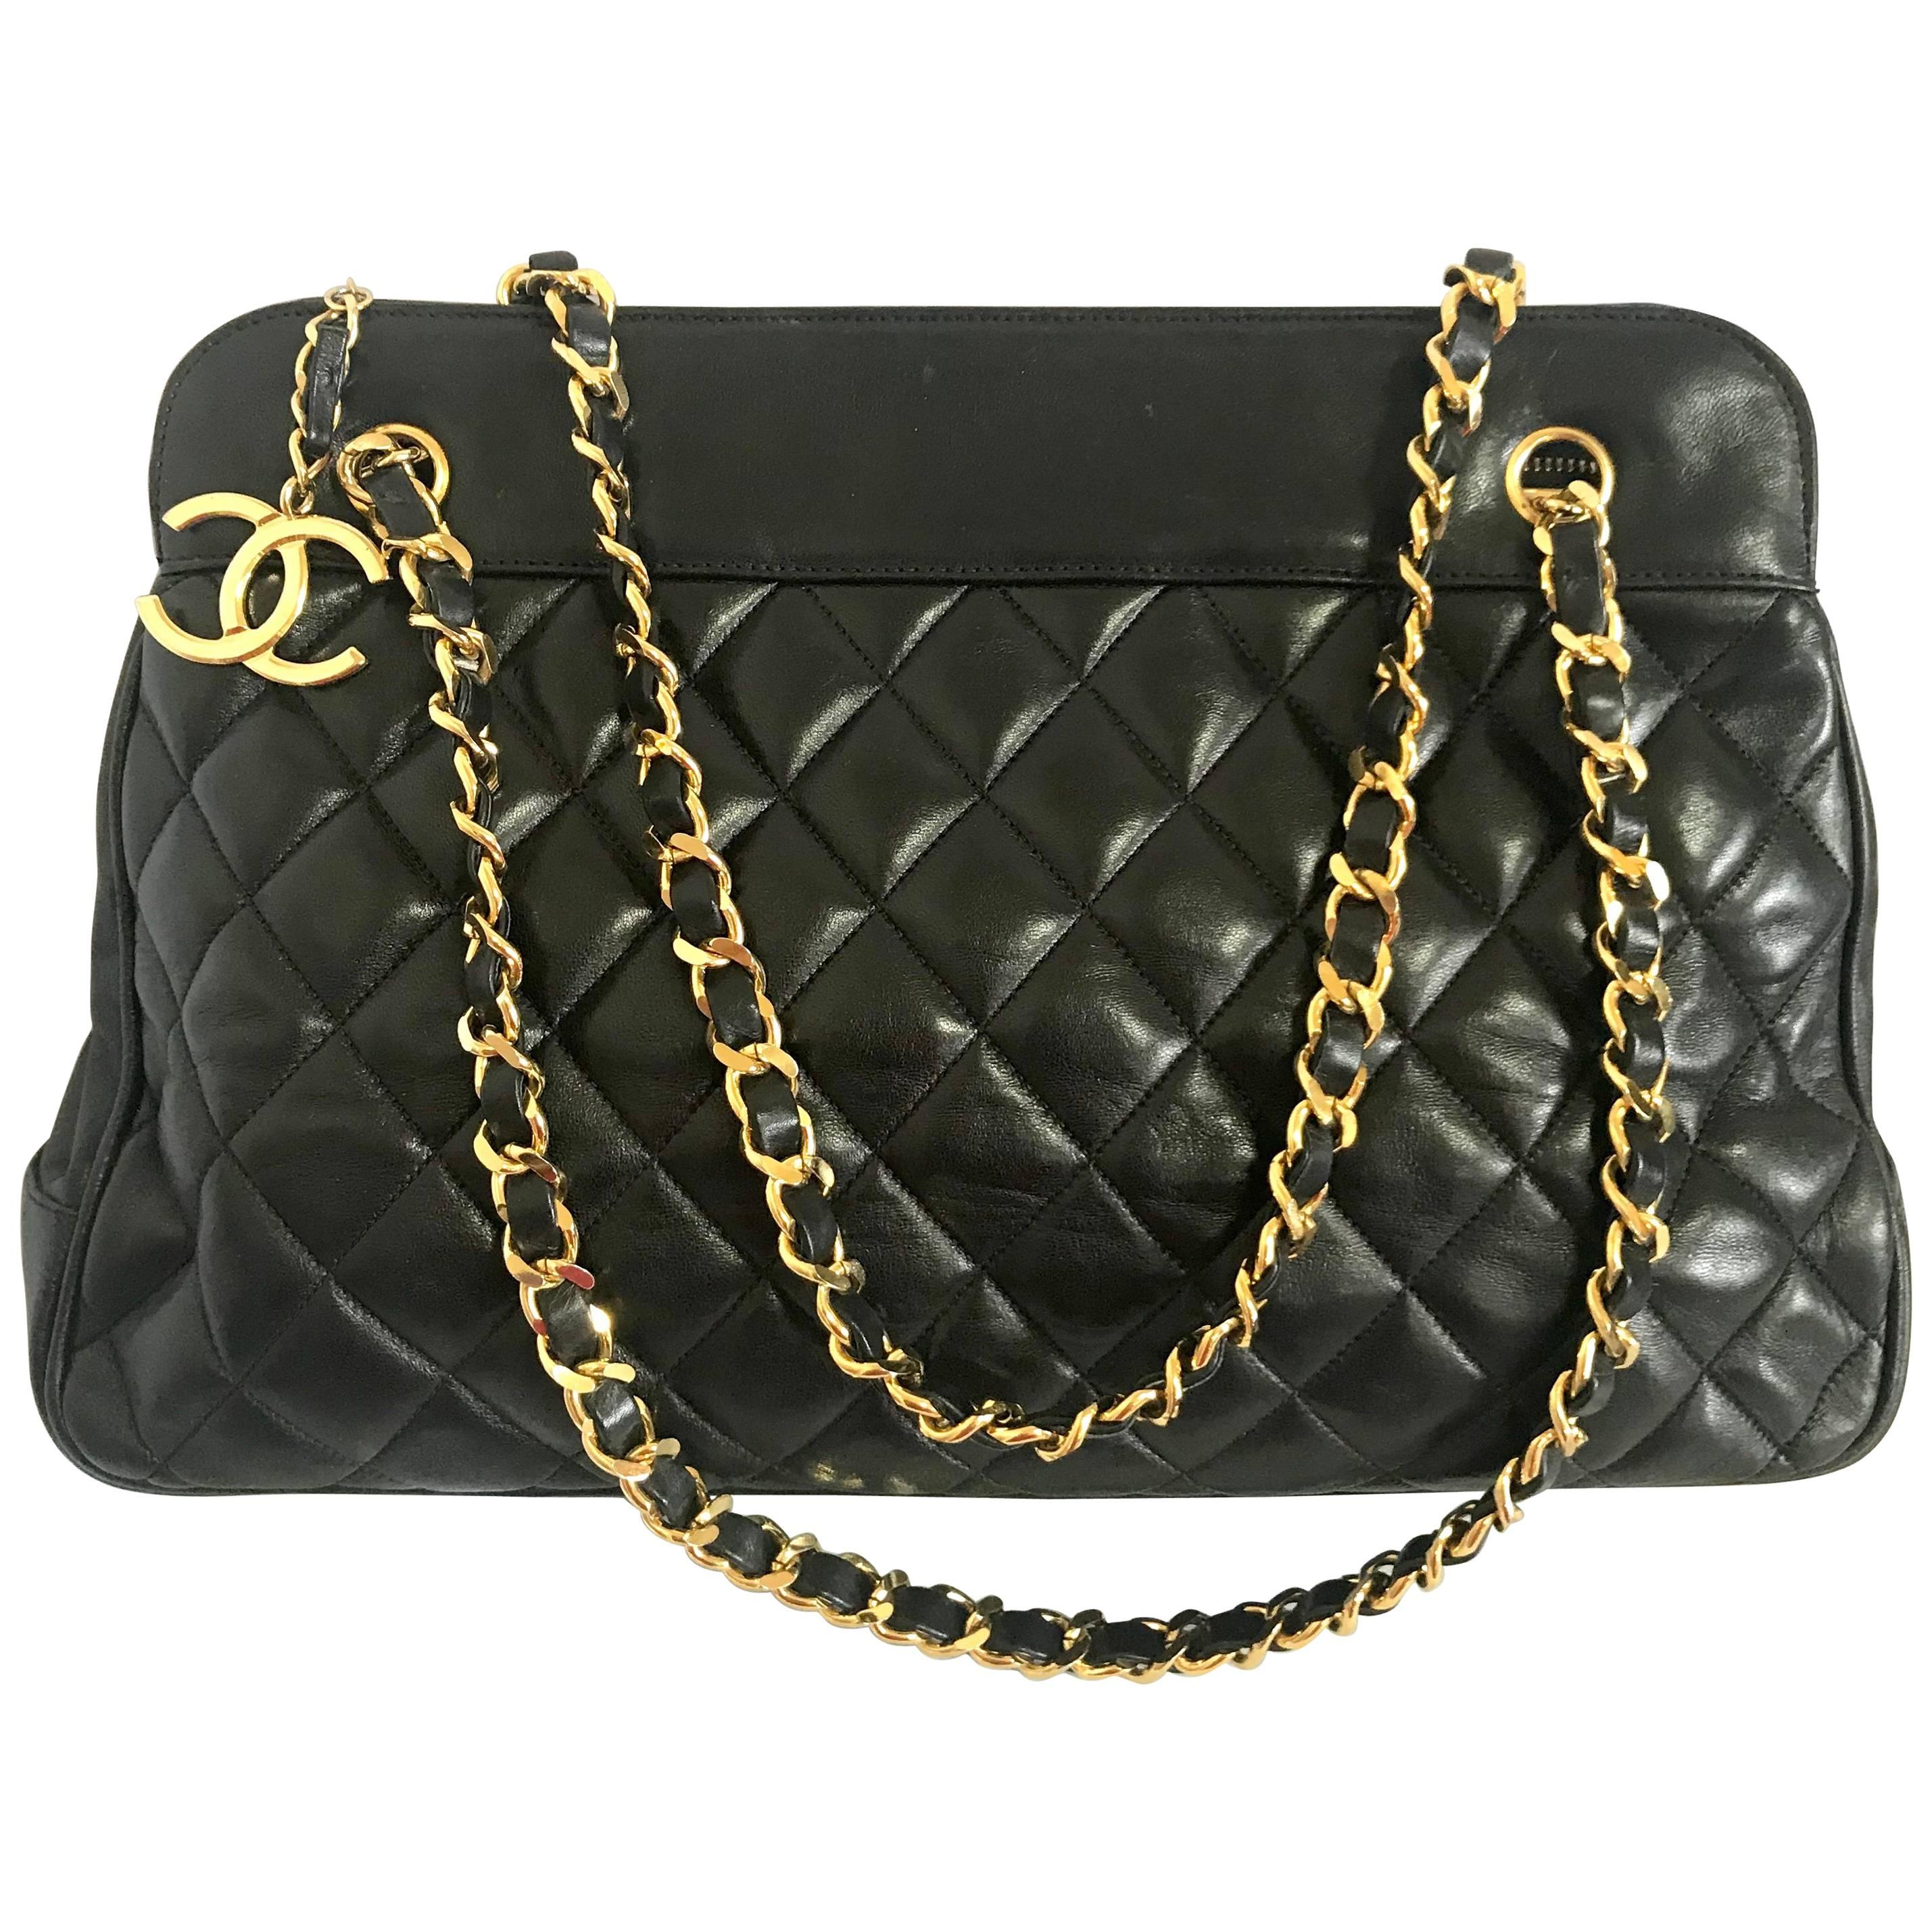 Vintage CHANEL black lambskin large tote bag with gold tone chains and jumbo CC. For Sale